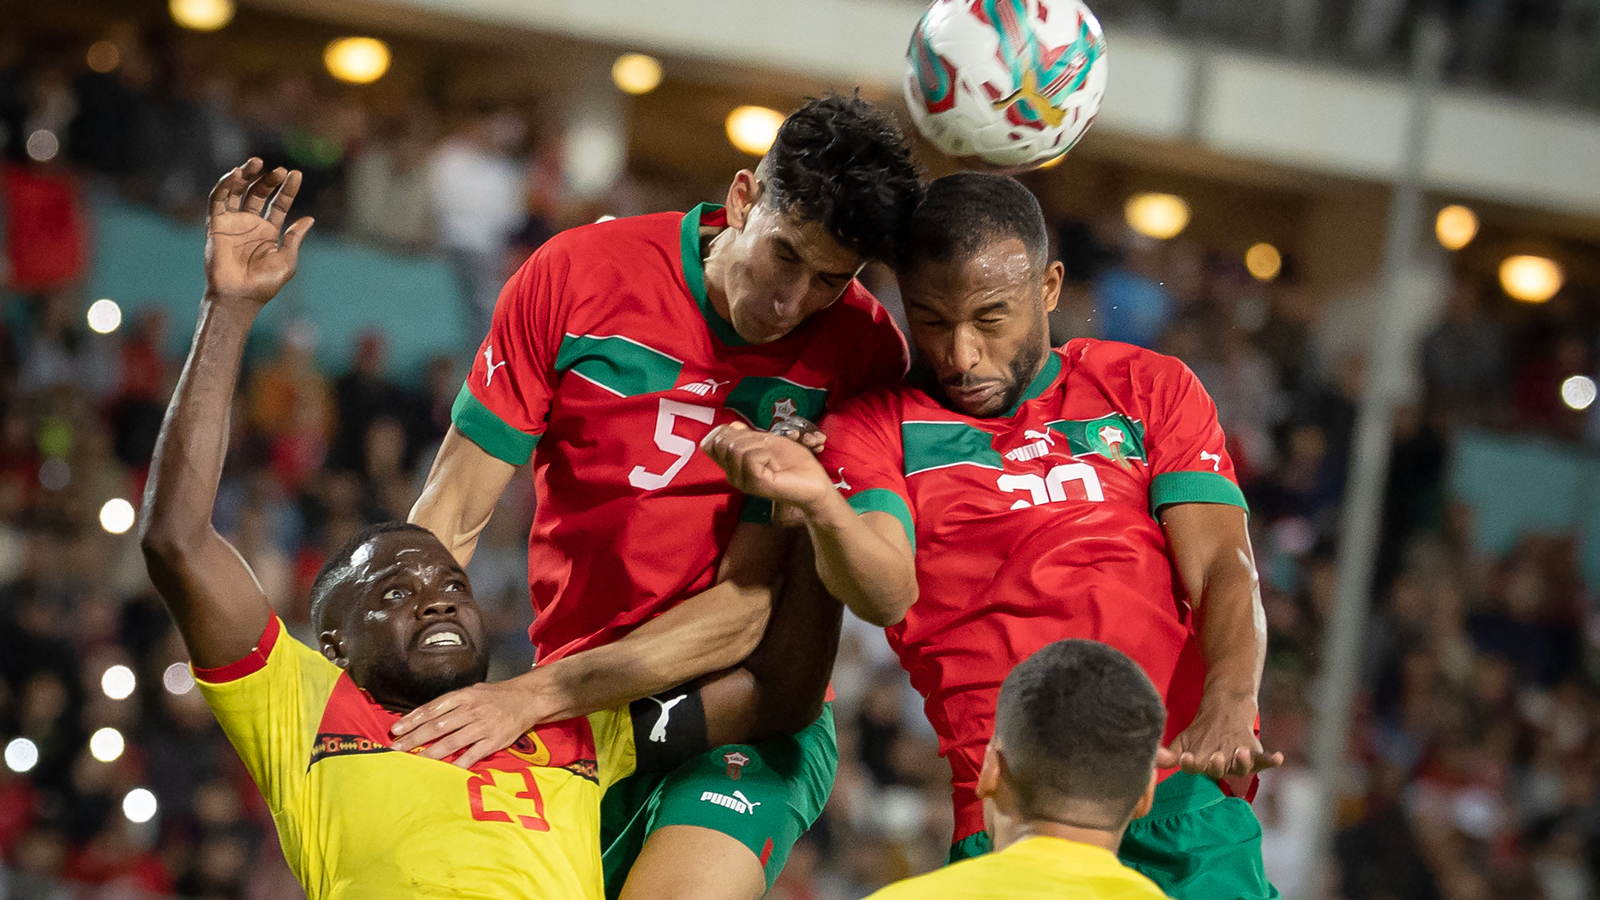 Nayef Aguerd wins a header in Morocco's game against Angola